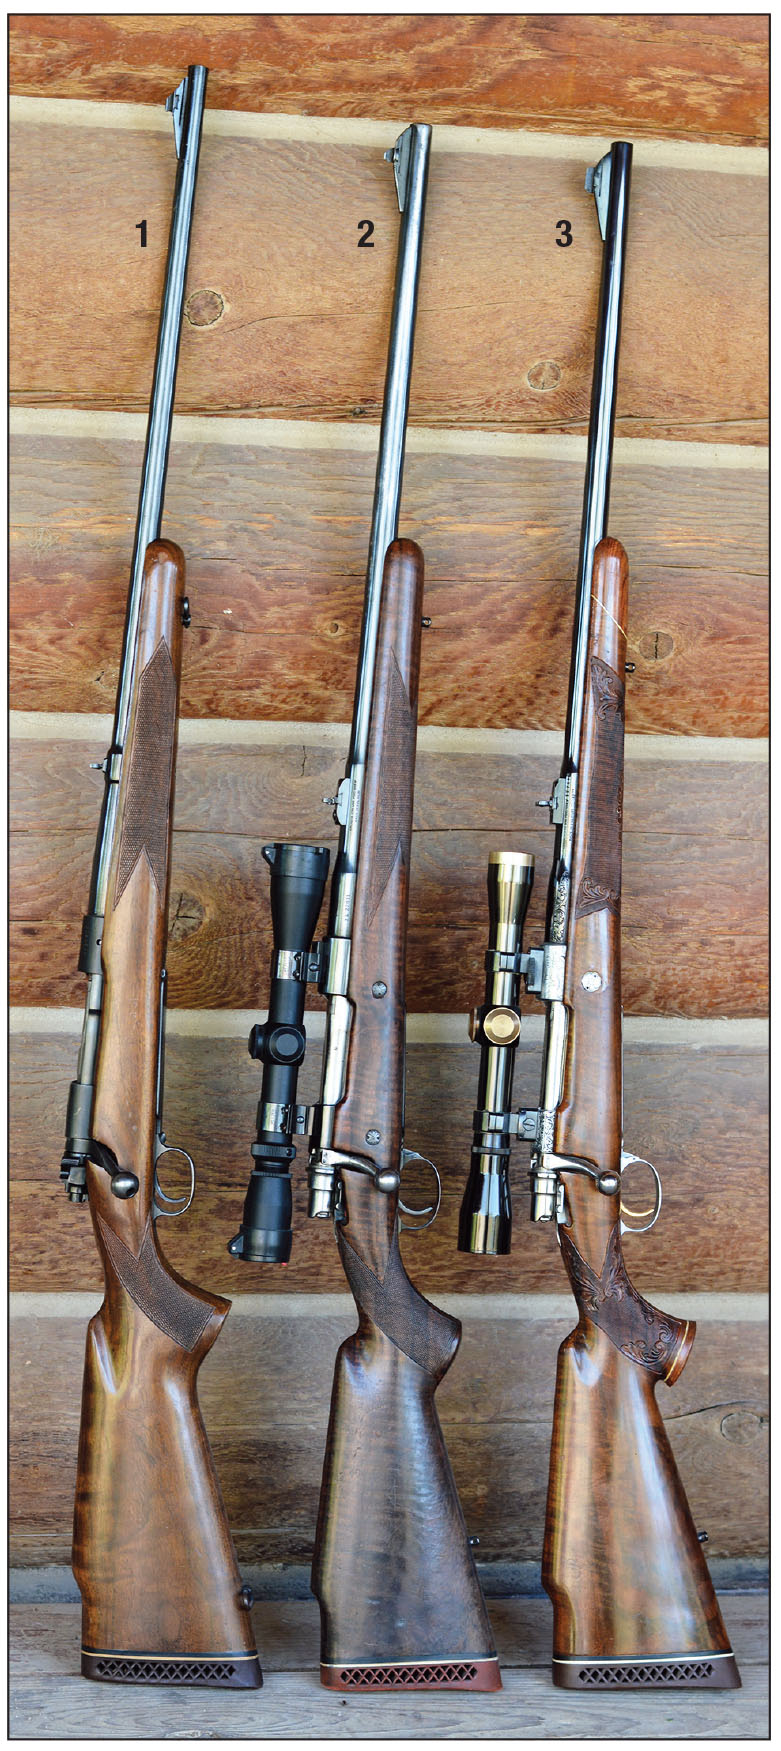 Some of Brian’s favorite .338 rifles include: (1) Winchester pre-’64 Model 70, (2) Browning FN High Power Safari grade, (3) Elmer Keith’s Browning FN High Power Olympian grade.